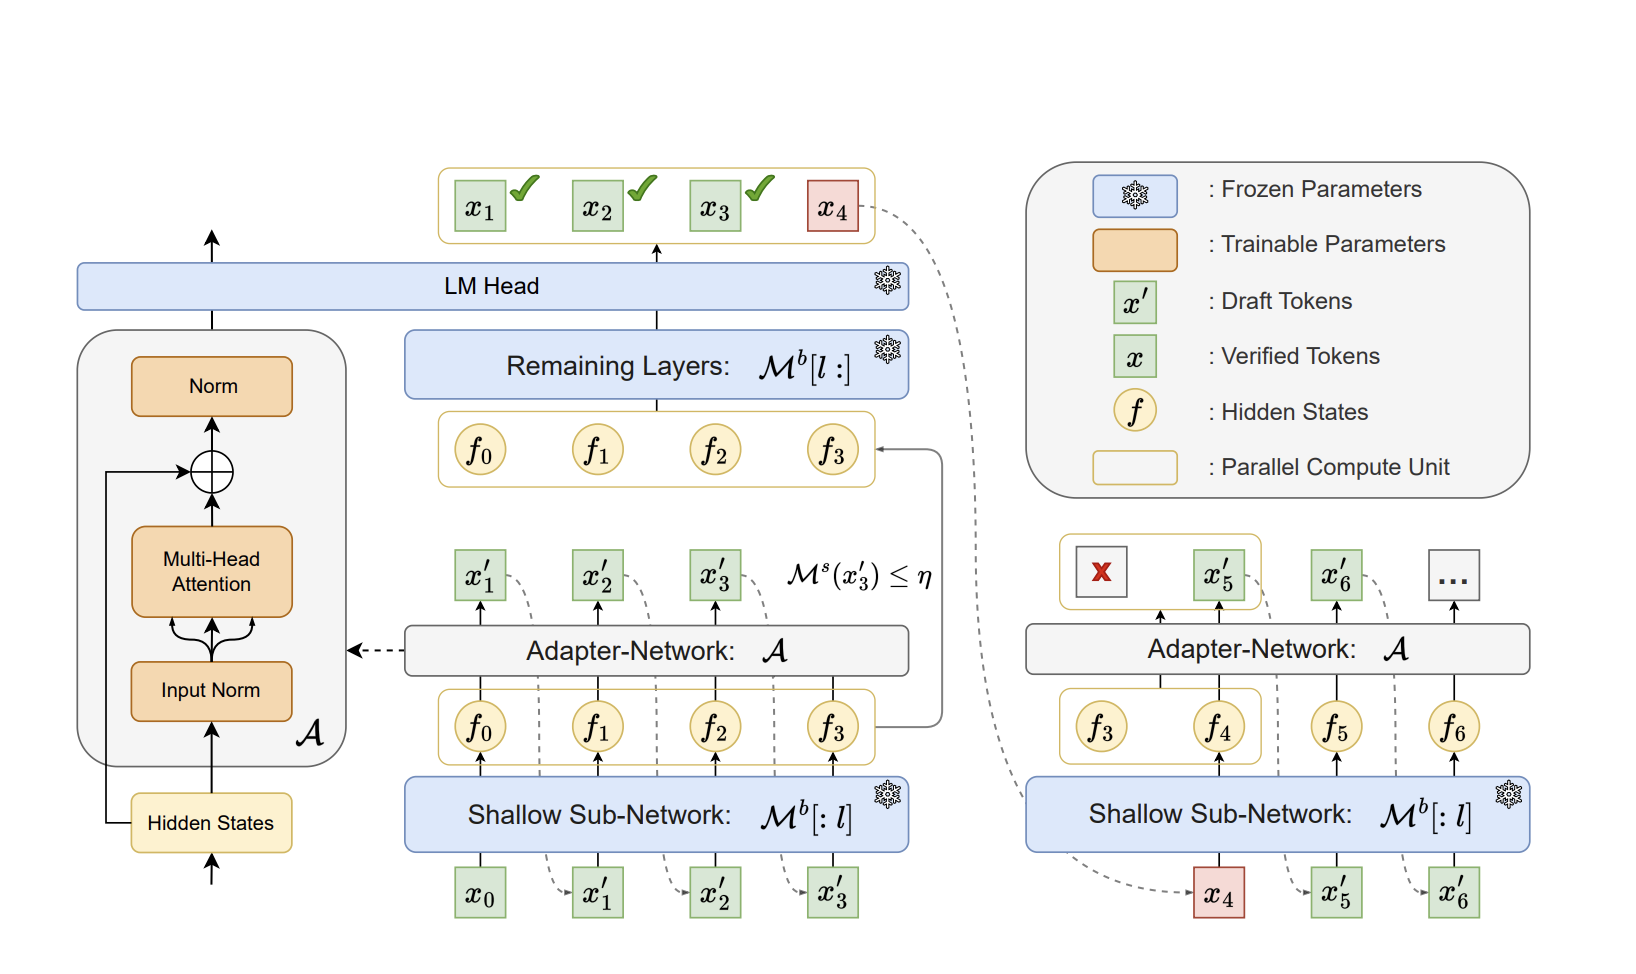  Huawei AI Introduces ‘Kangaroo’: A Novel Self-Speculative Decoding Framework Tailored for Accelerating the Inference of Large Language Models